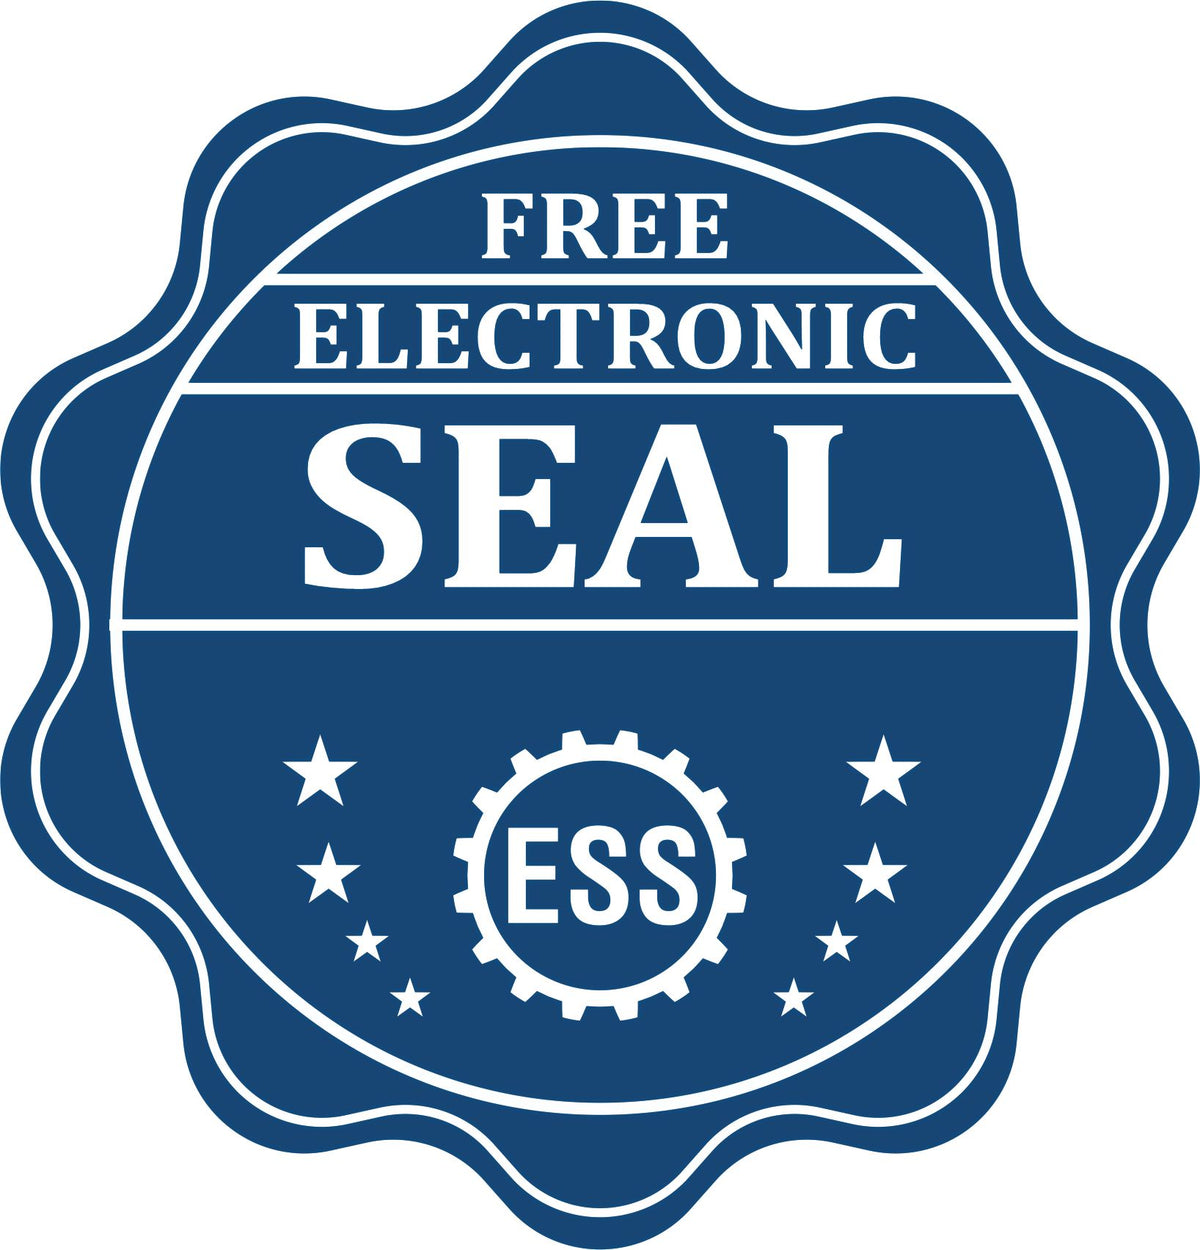 A badge showing a free electronic seal for the State of Washington Long Reach Architectural Embossing Seal with stars and the ESS gear on the emblem.